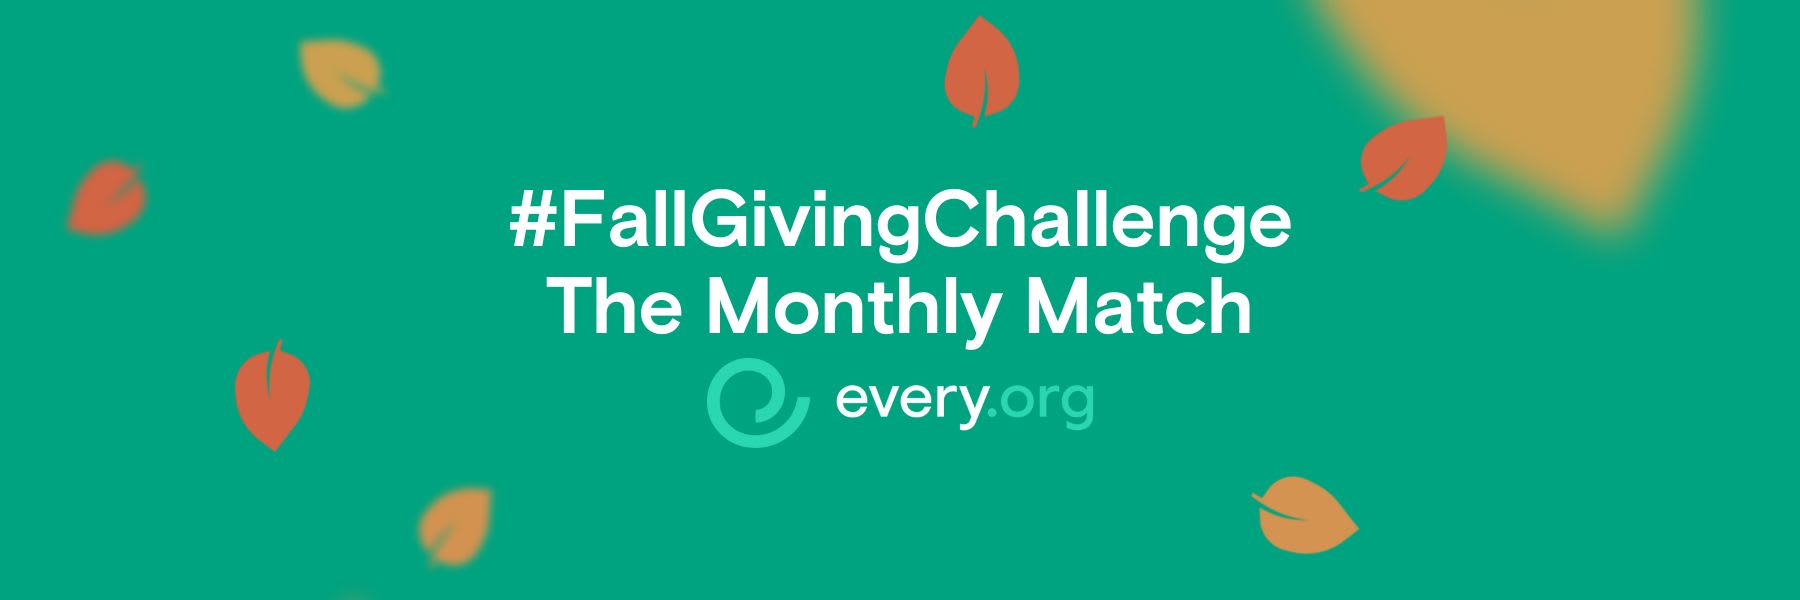 #FallGivingChallenge - The Monthly Match